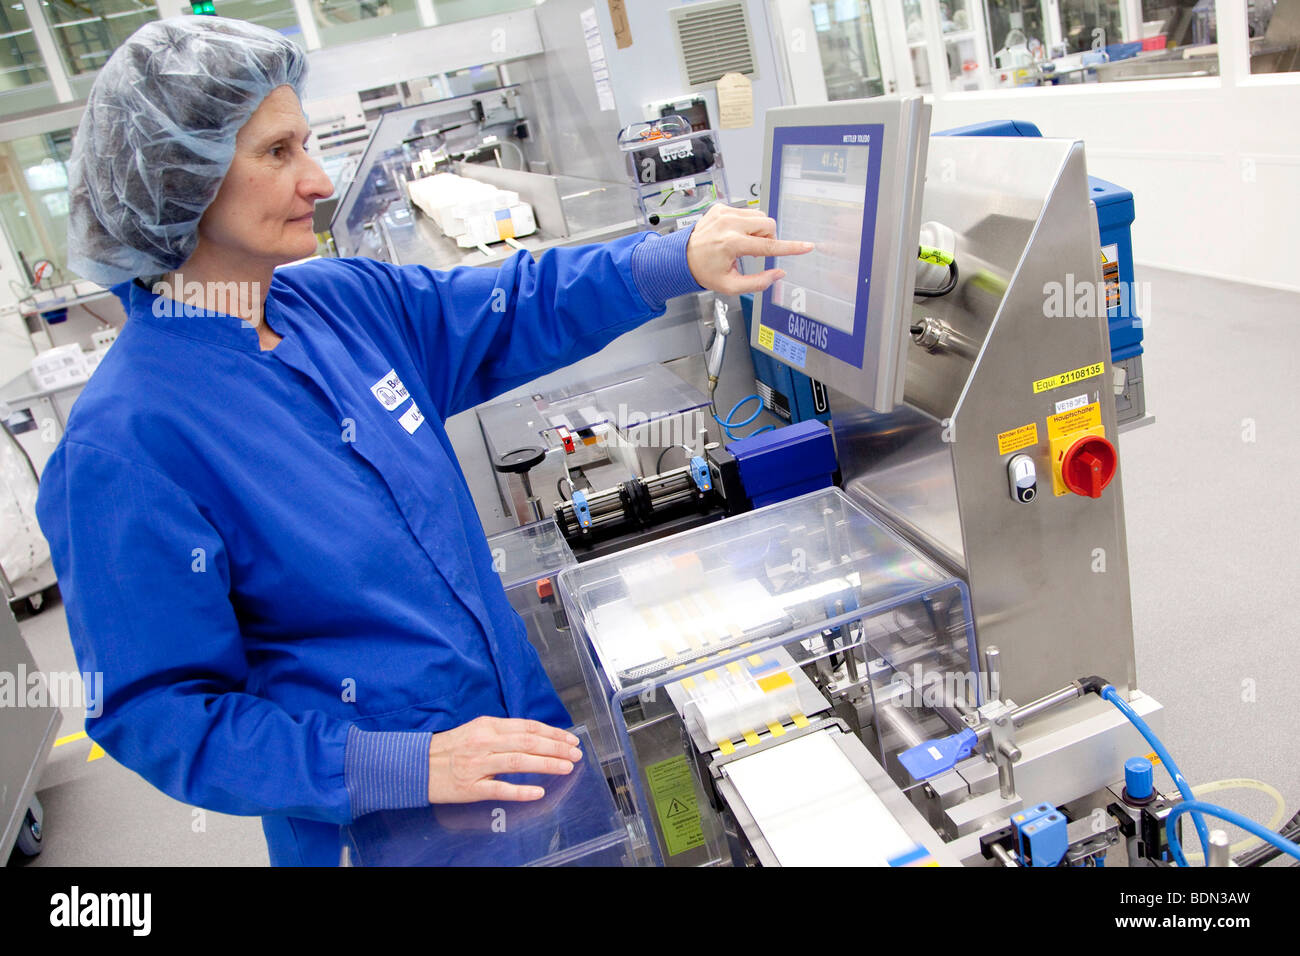 Employee of Boehringer Ingelheim GmbH, checking a packaging machine in the logistics and packaging center, pharmaceutical compa Stock Photo